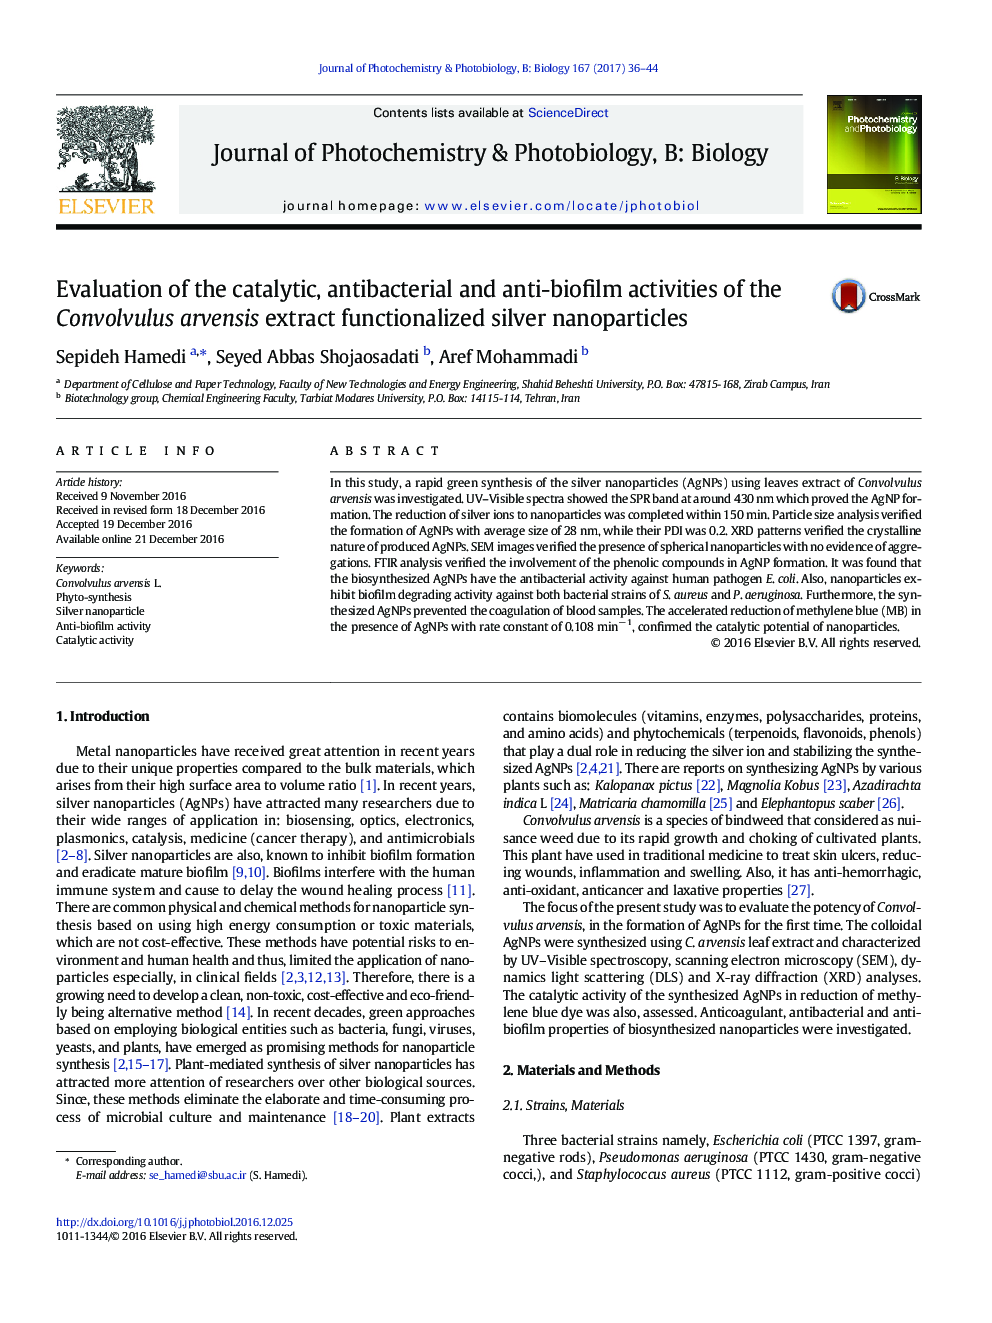 Evaluation of the catalytic, antibacterial and anti-biofilm activities of the Convolvulus arvensis extract functionalized silver nanoparticles